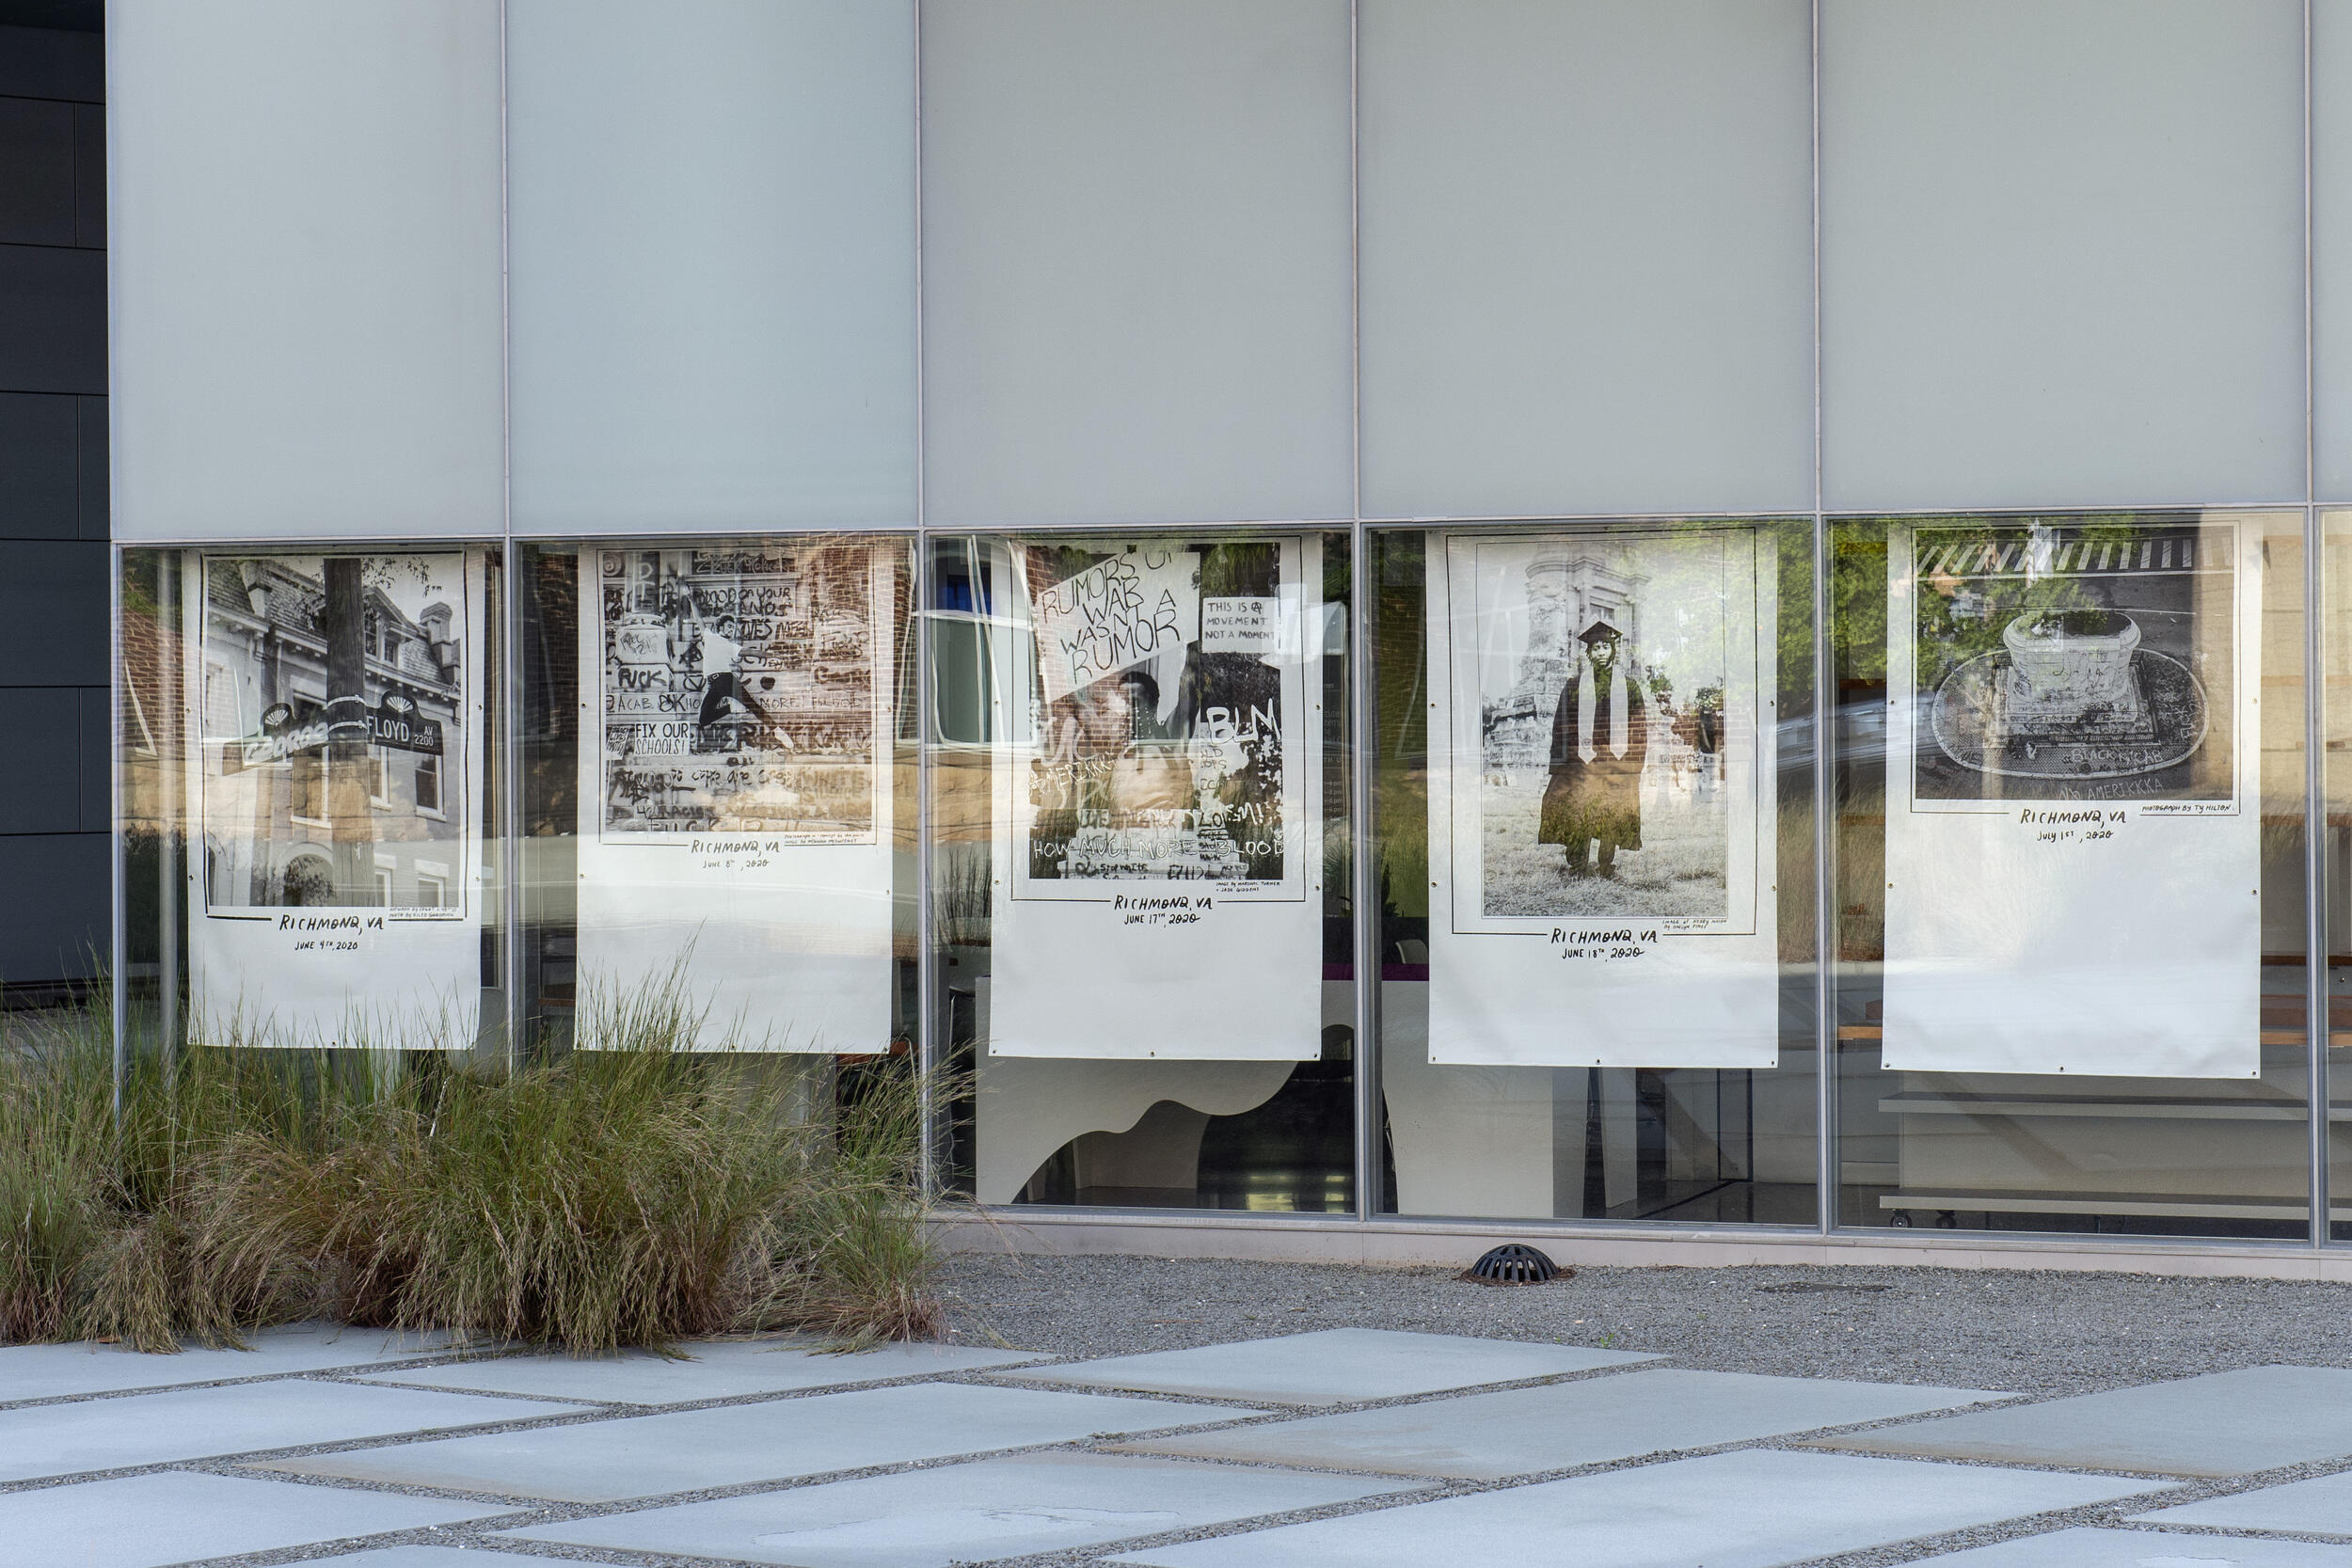 The windows of the Institute for Contemporary Art with artwork displayed.